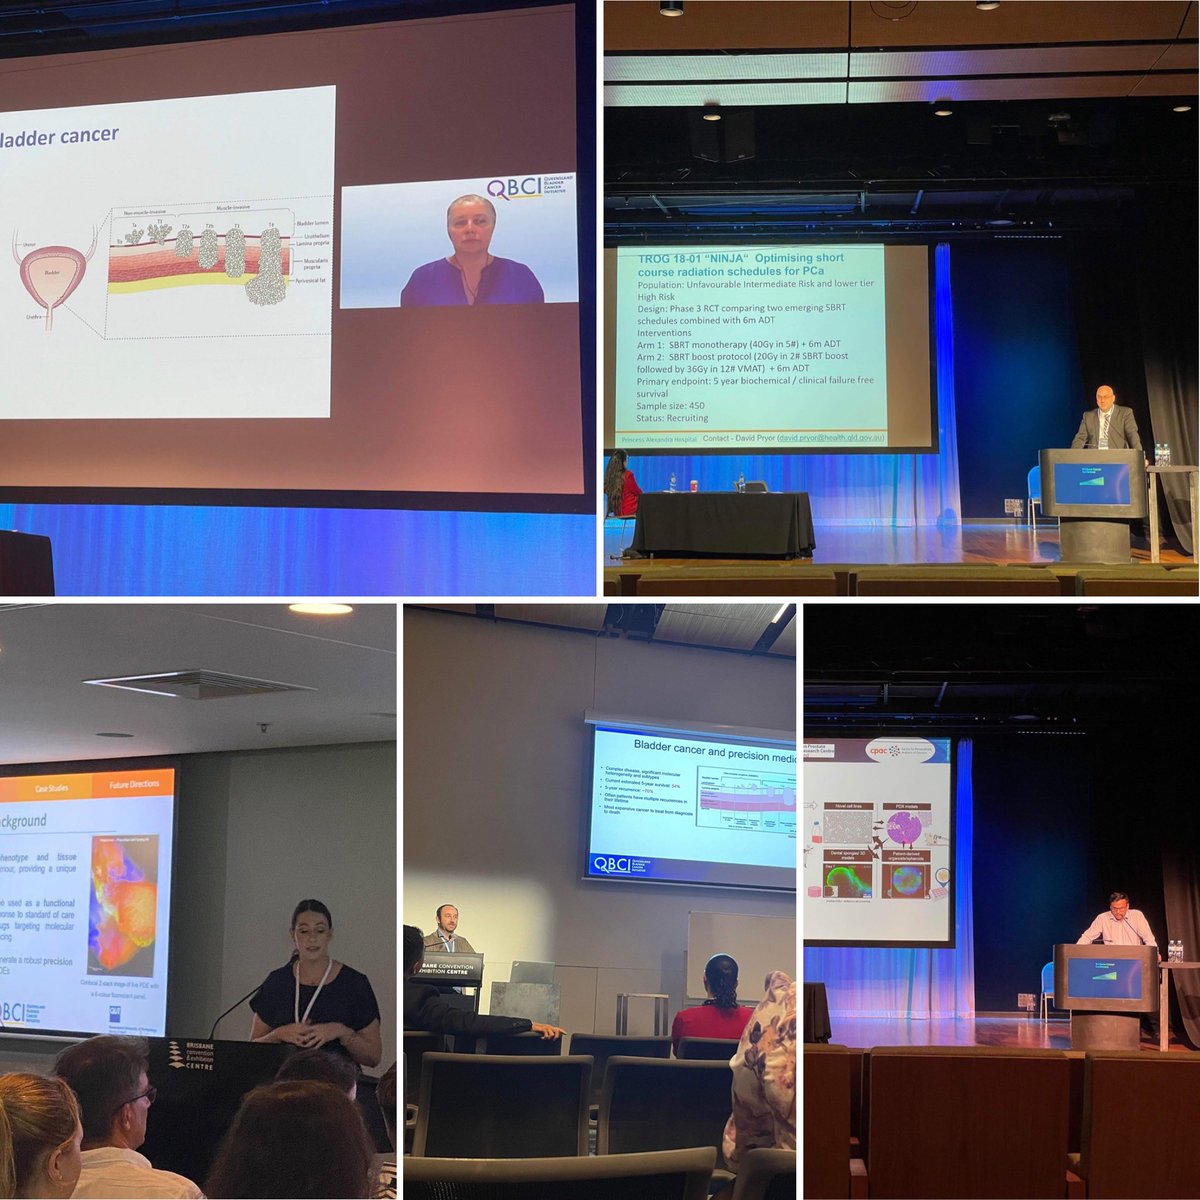 All things #urologicalcancer, from preclinical models to clinical trials and #PrecisionMedicine. A few key @QBCI_ highlights from the Brisbane Cancer Conference #BCC2021. Team certainly looking good up there! #cancerresearch @OzEDW @PARFoundation @TRI_info @apcrcq @bca_australia